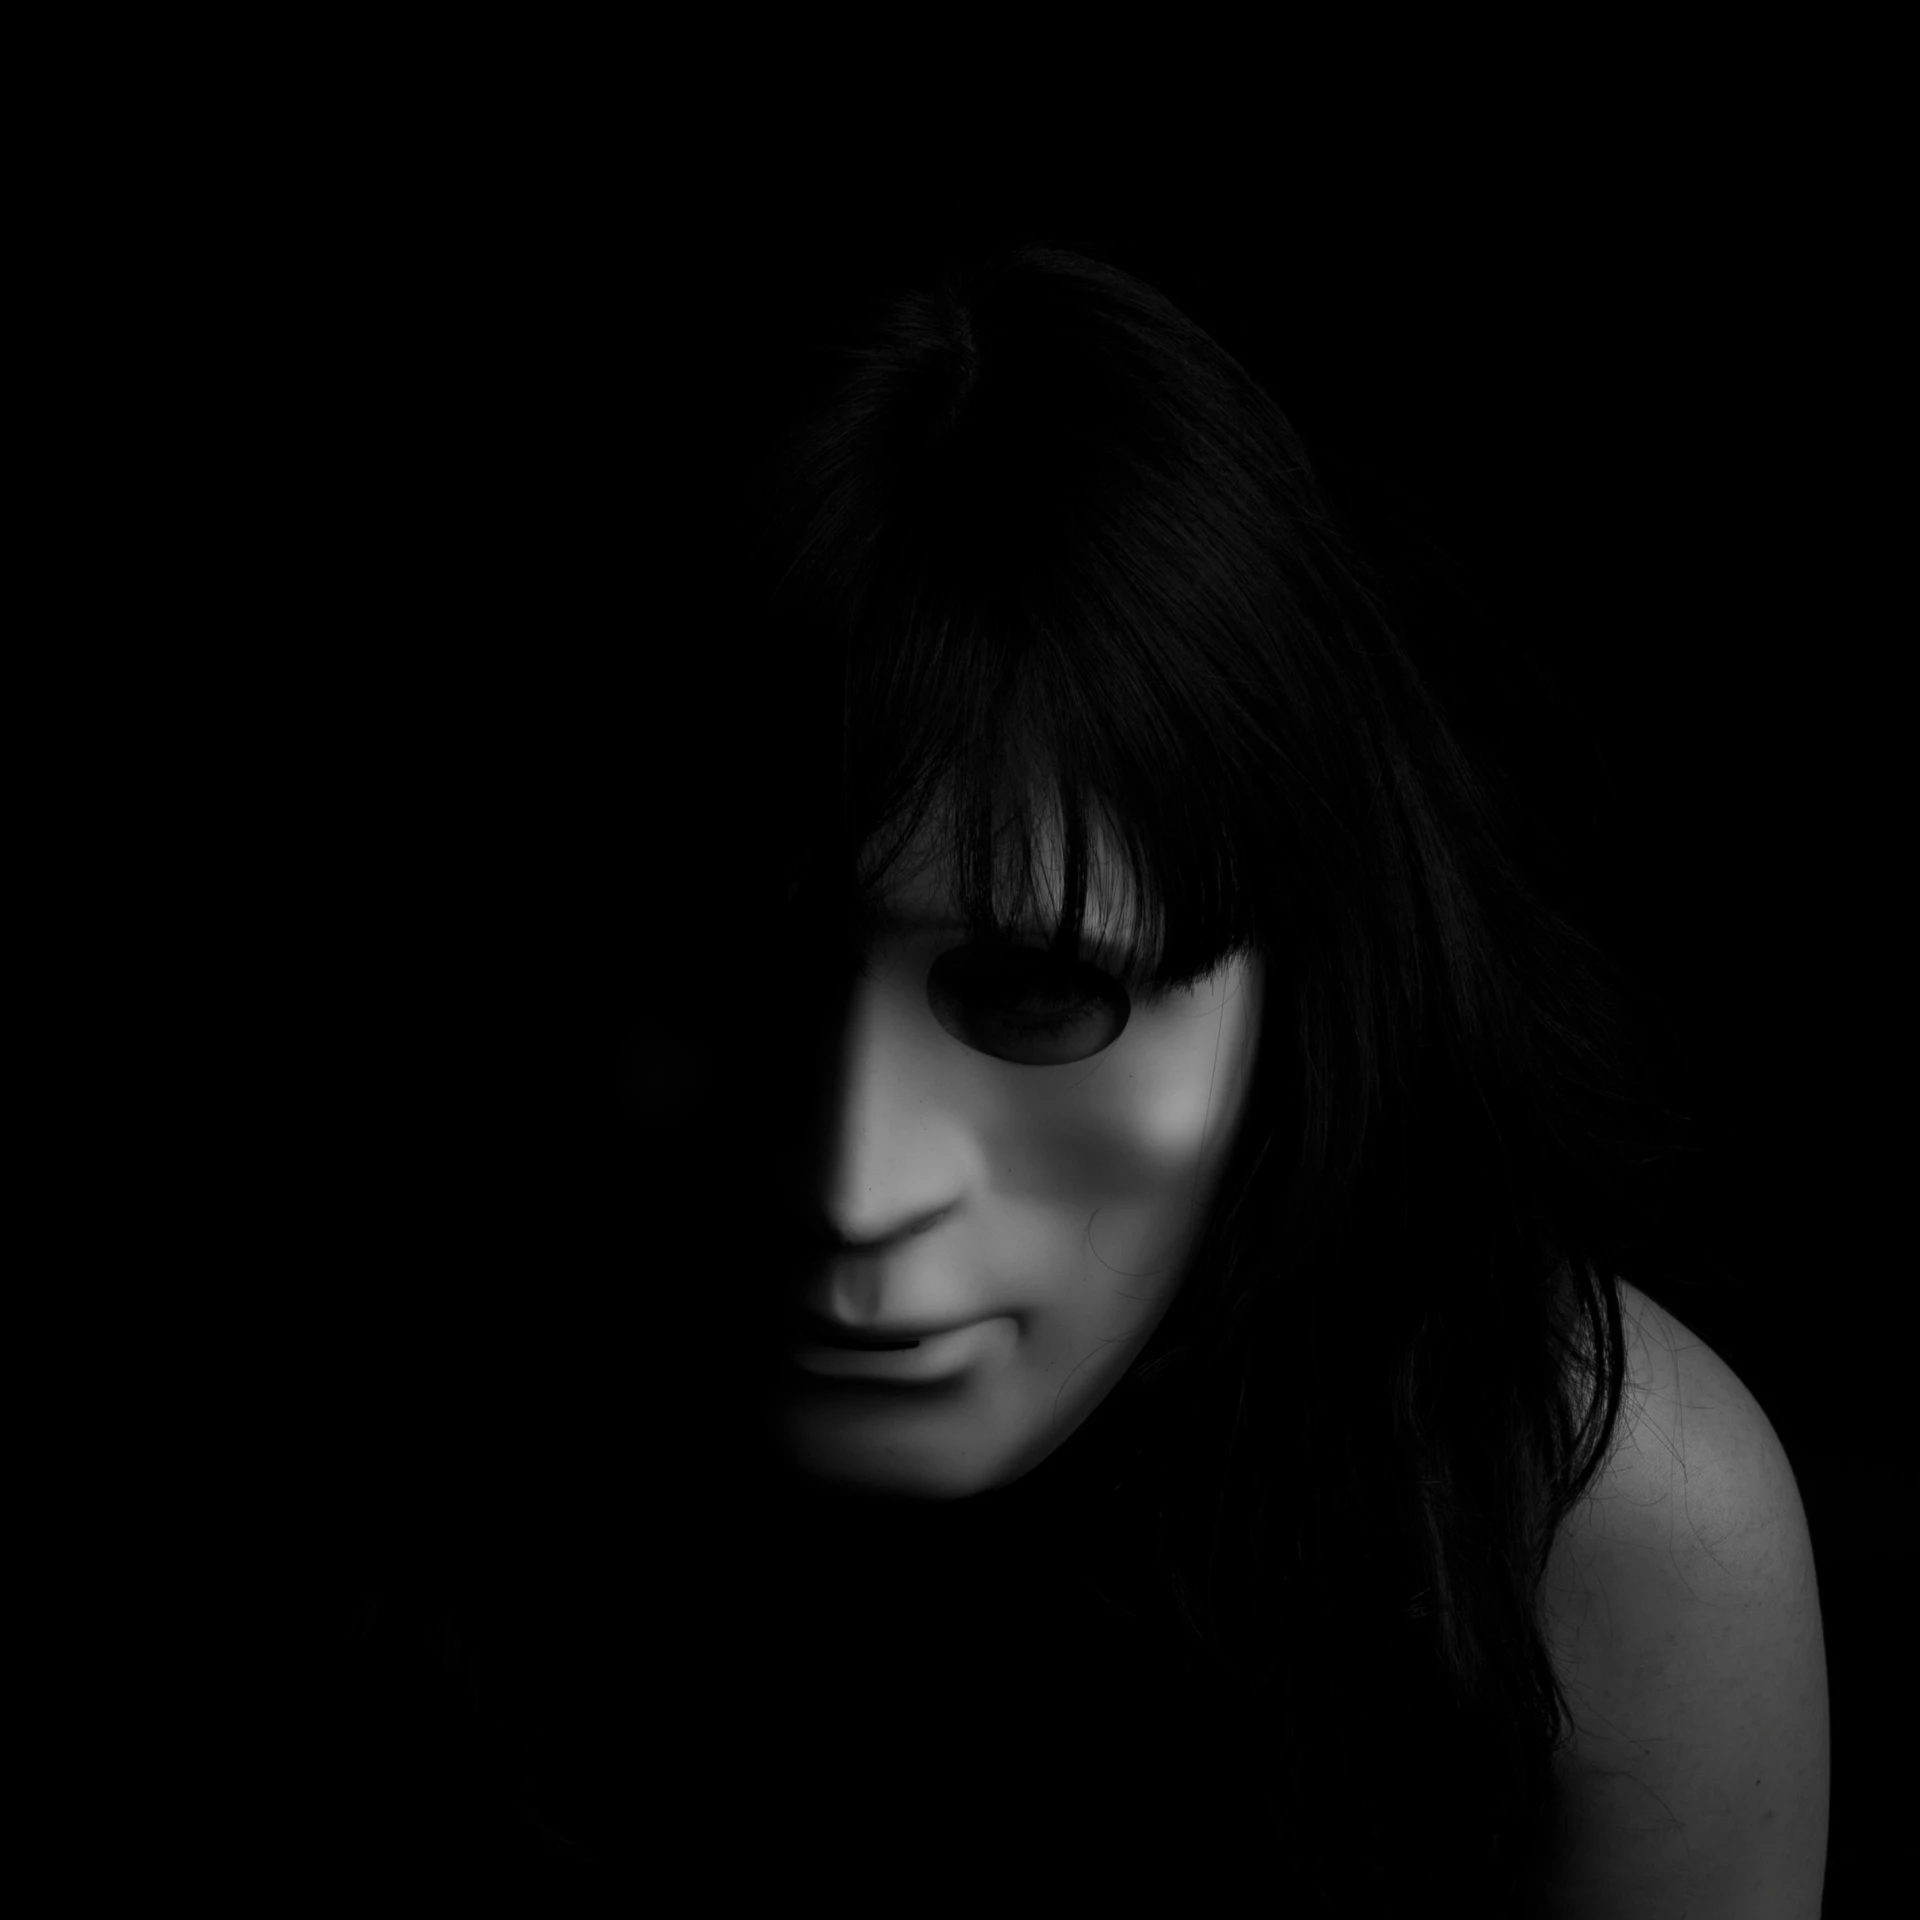 a black and white photo of a woman in the dark, an album cover, inspired by Gottfried Helnwein, pexels contest winner, conceptual art, black bangs, portrait of a humanoid alien, portrait of male humanoid, black eyed